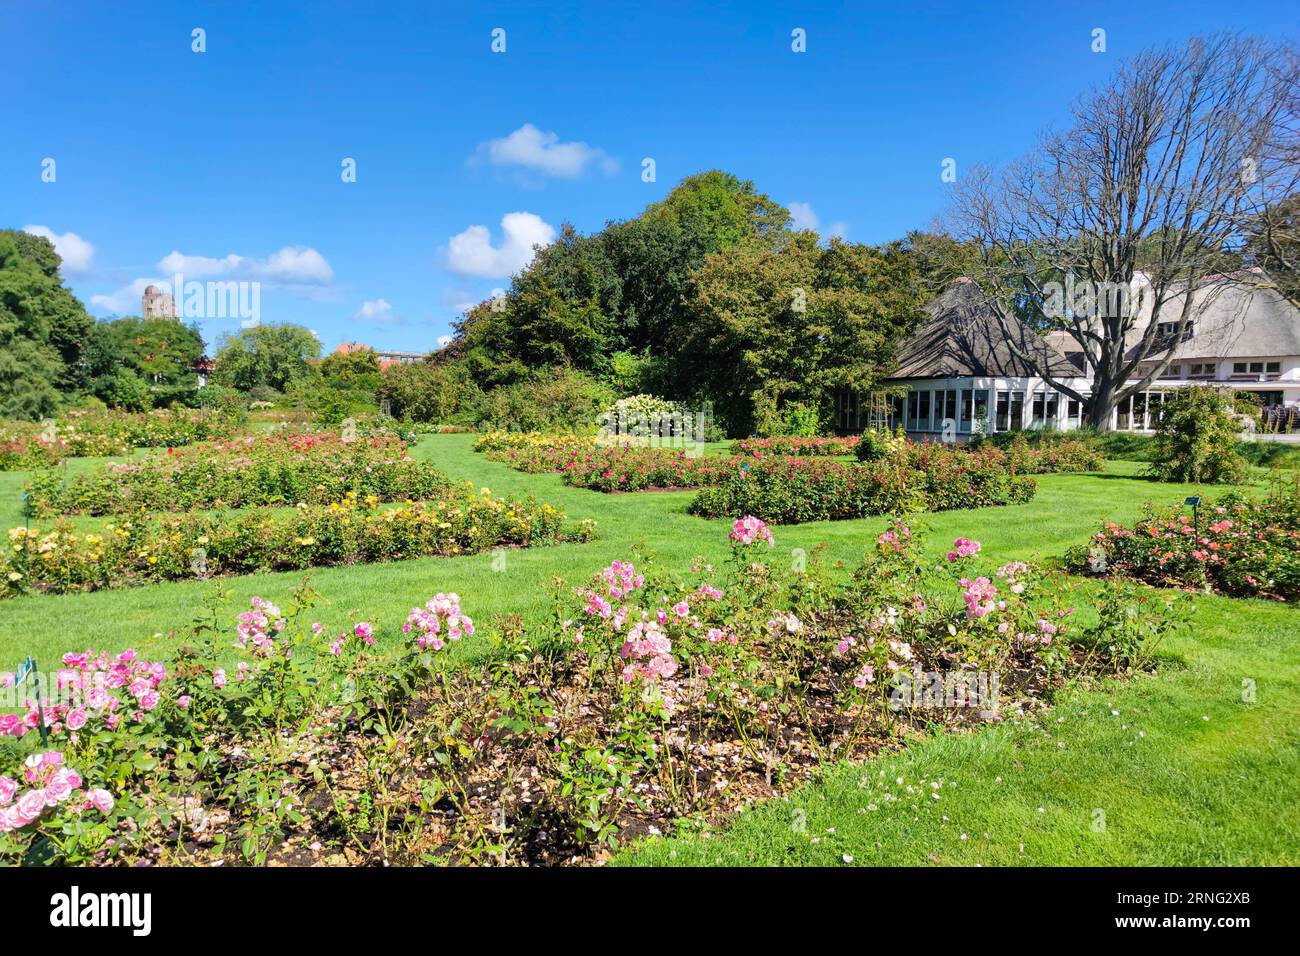 Rose garden in a city park in The Hague Stock Photo